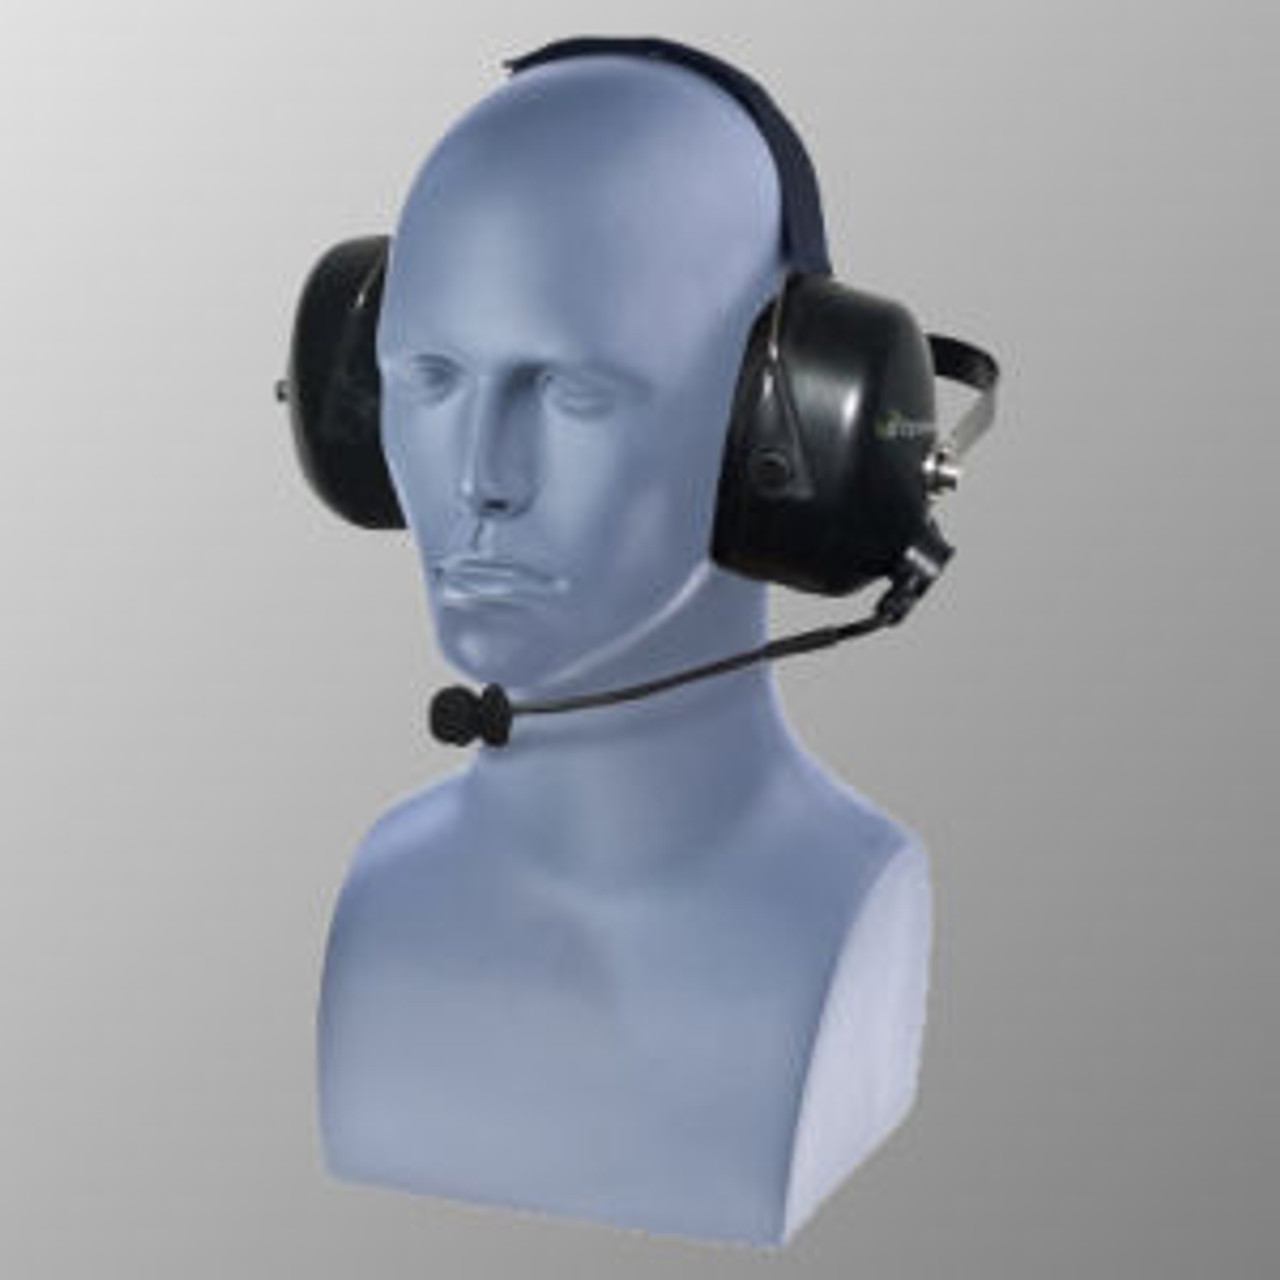 Motorola HT1550 Noise Canceling Double Muff Behind The Head Headset